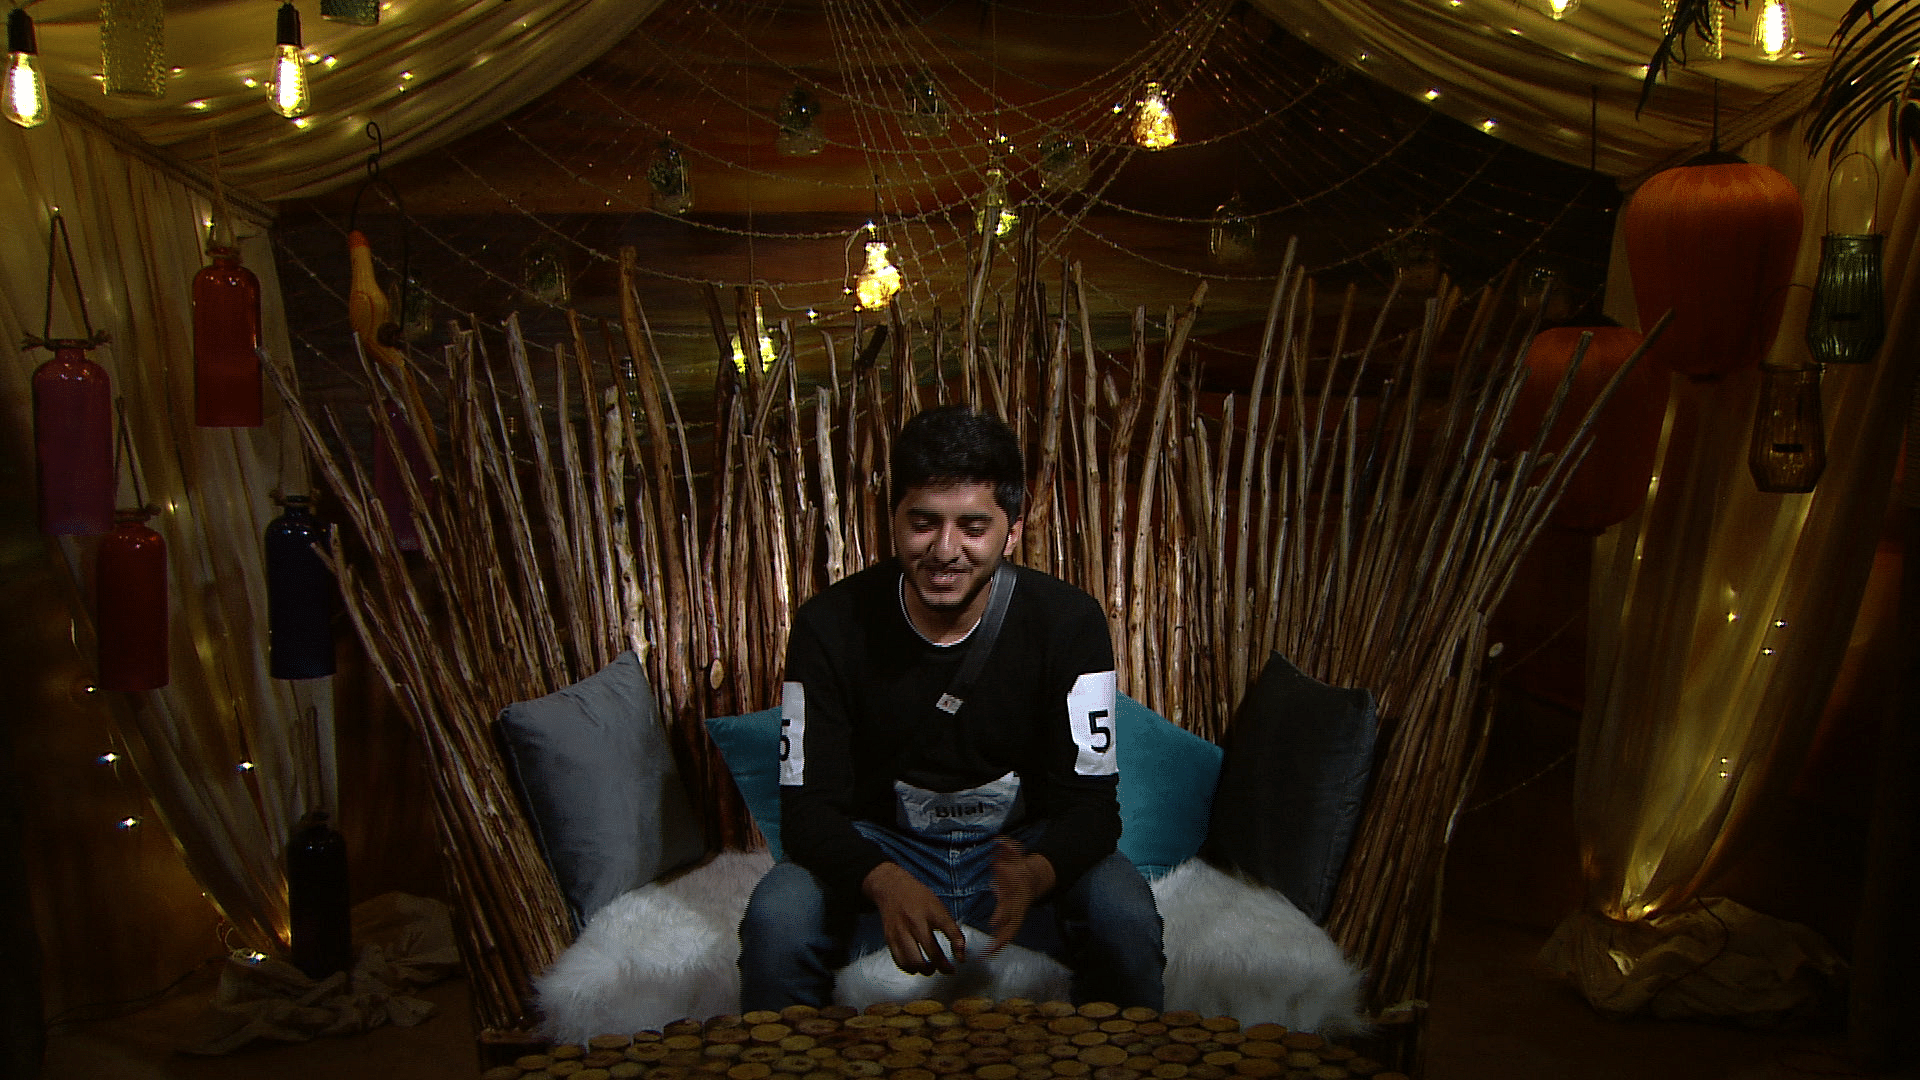 Here’s how I fared in the notorious ‘confession room’ in the Bigg Boss house.